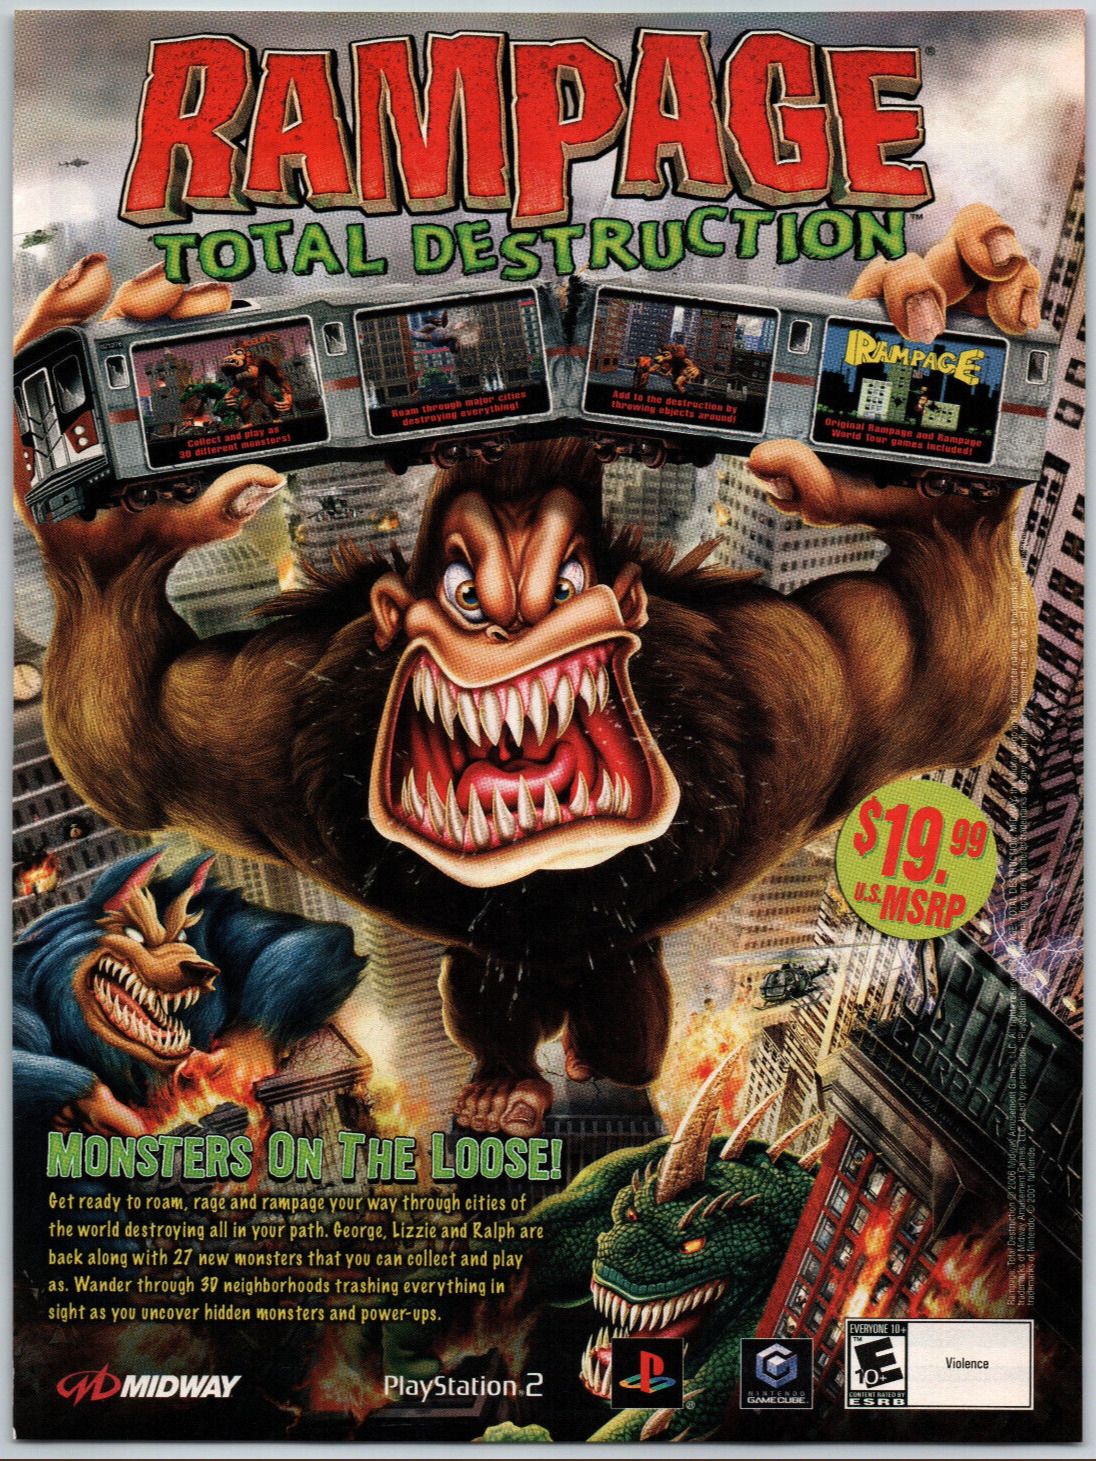 Rampage Total Destruction Midway - Video Game Print Ad / Poster Promo Art 2006